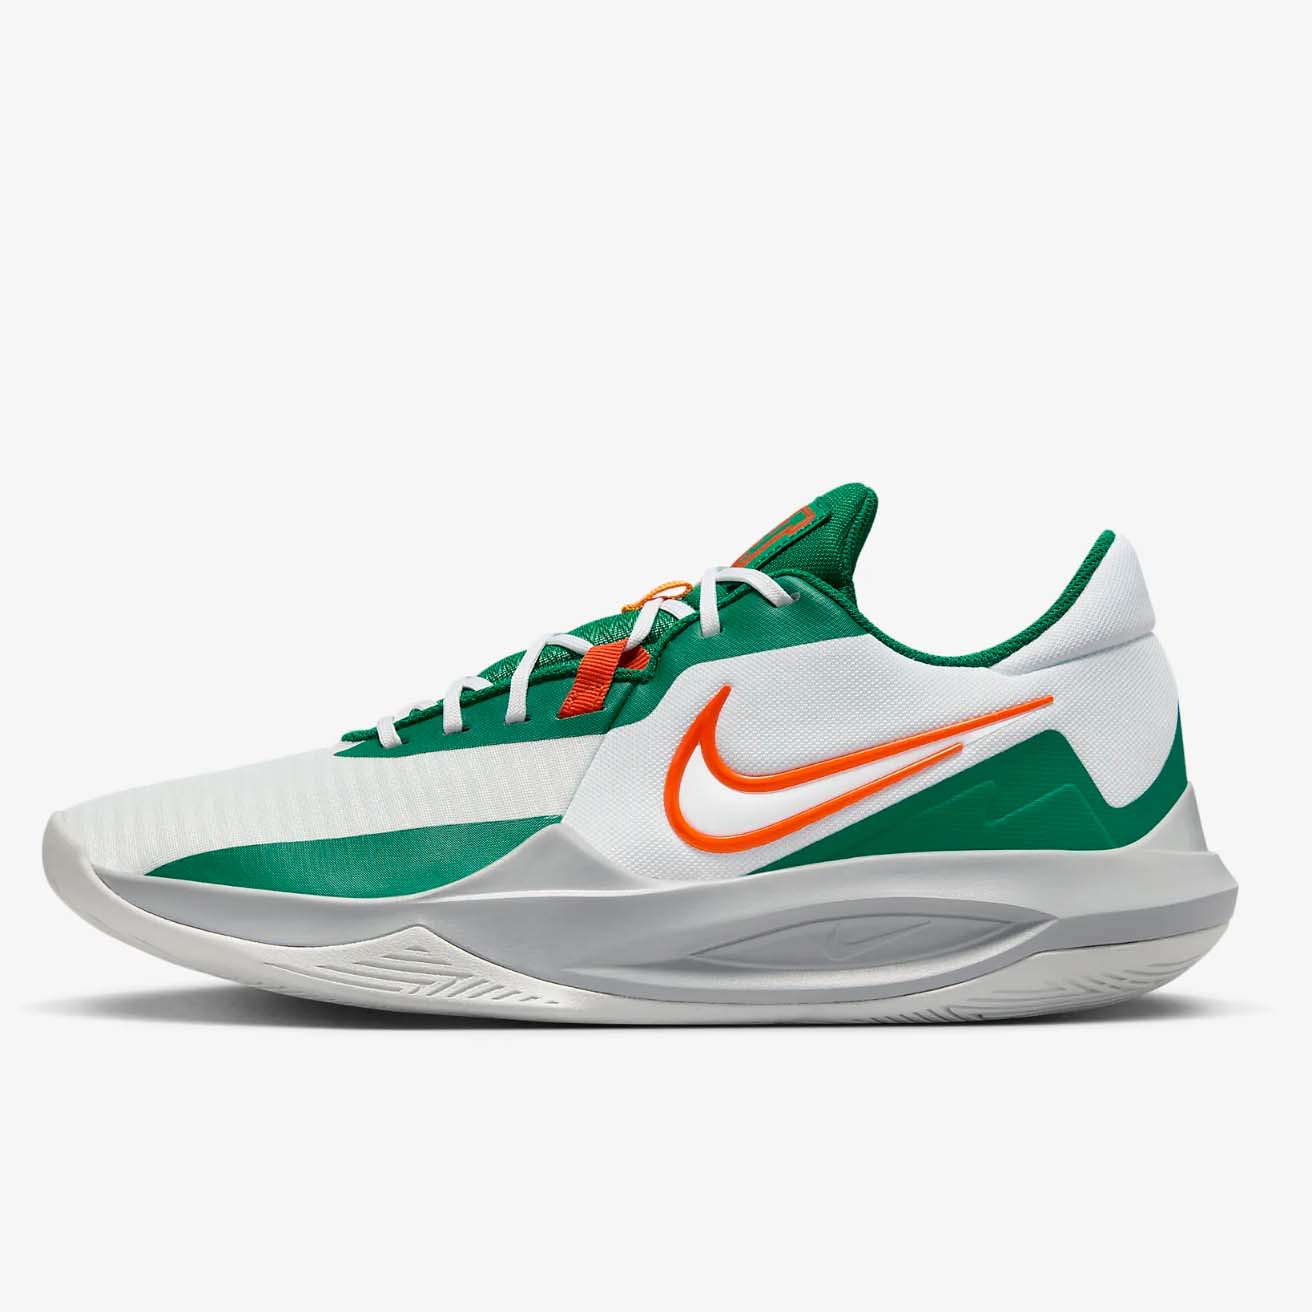 Nike Precision 6 basketball shoes in green, white and orange